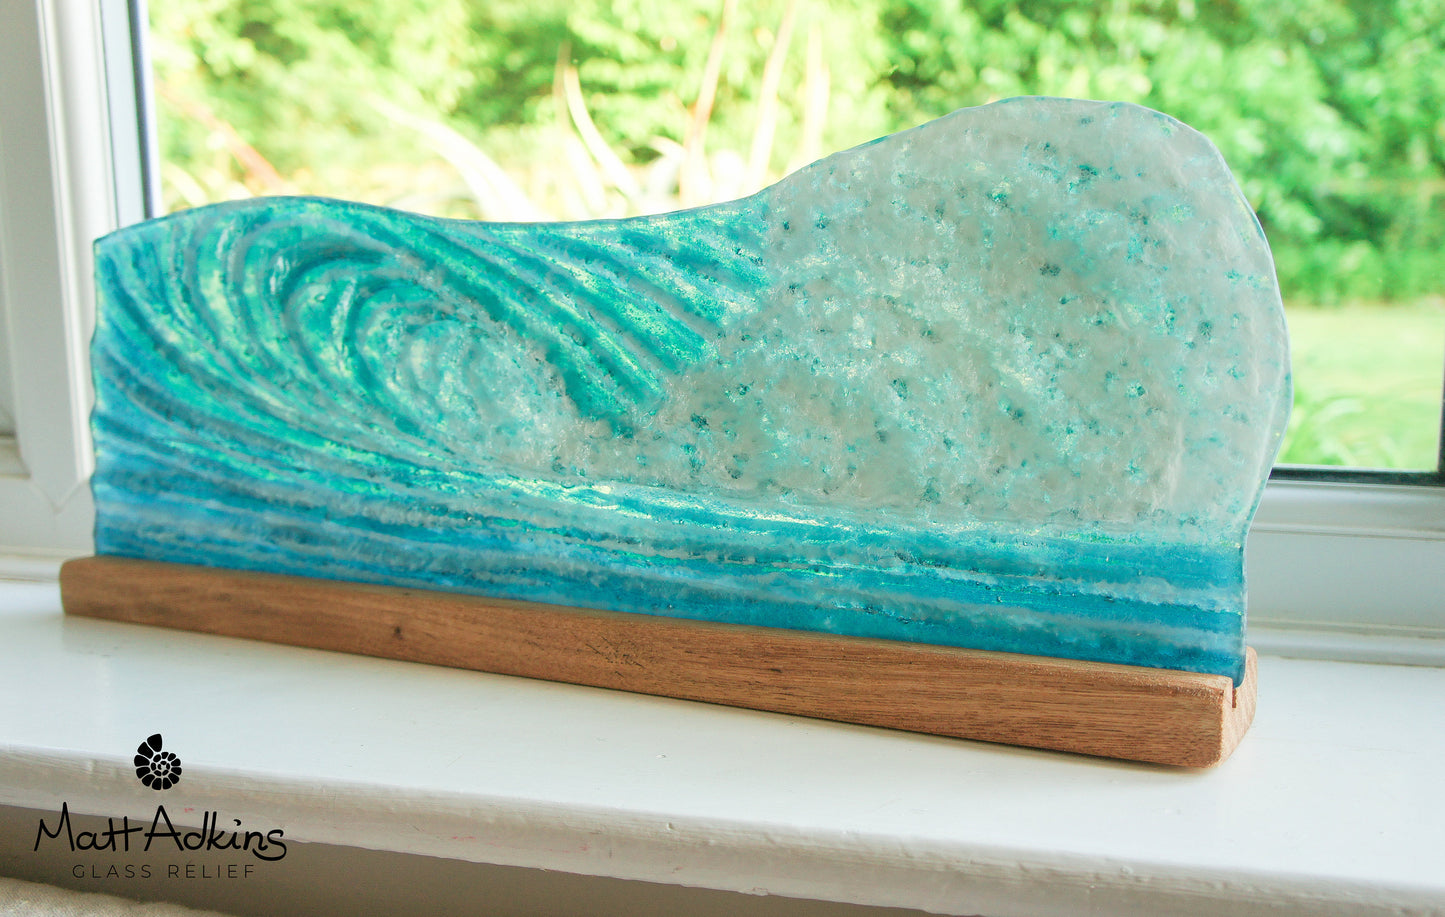 Surfers' Wave Panel - Freestanding - 52x19cm(20x7 1/2") with a wooden stand